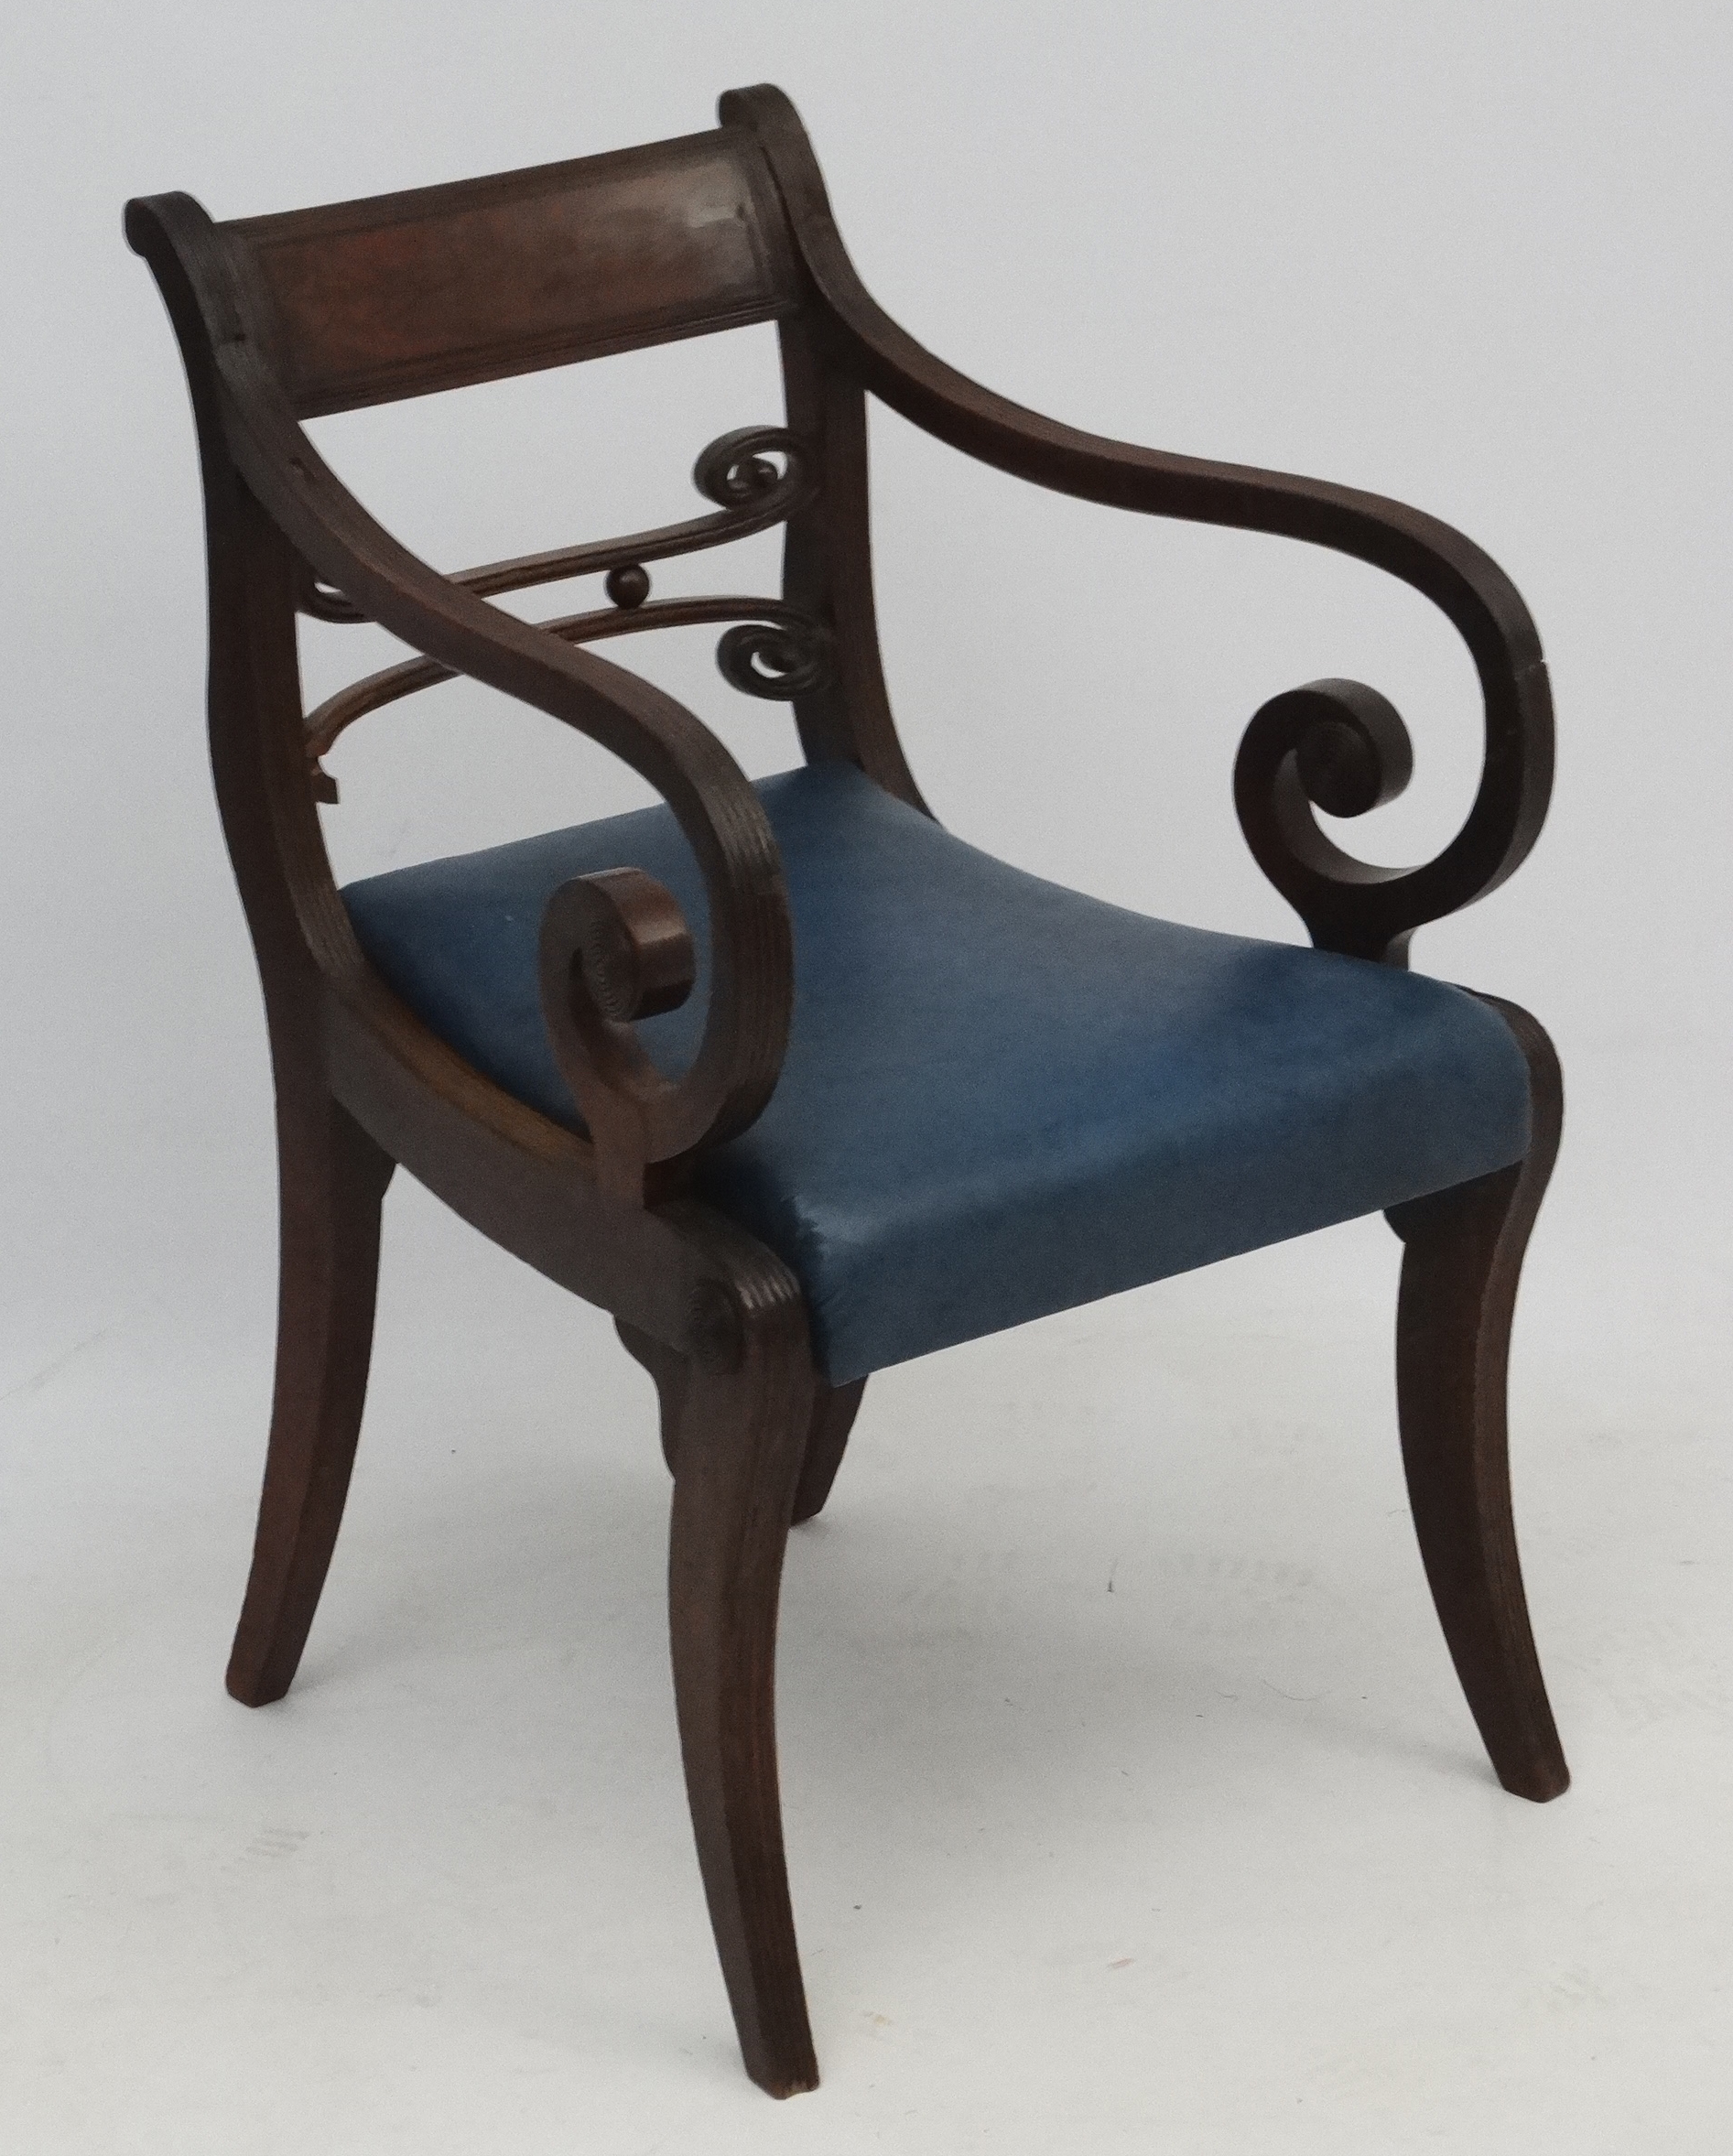 A Regency mahogany open arm / carver chair with sabre legs and drop in seats 32 1/2" high